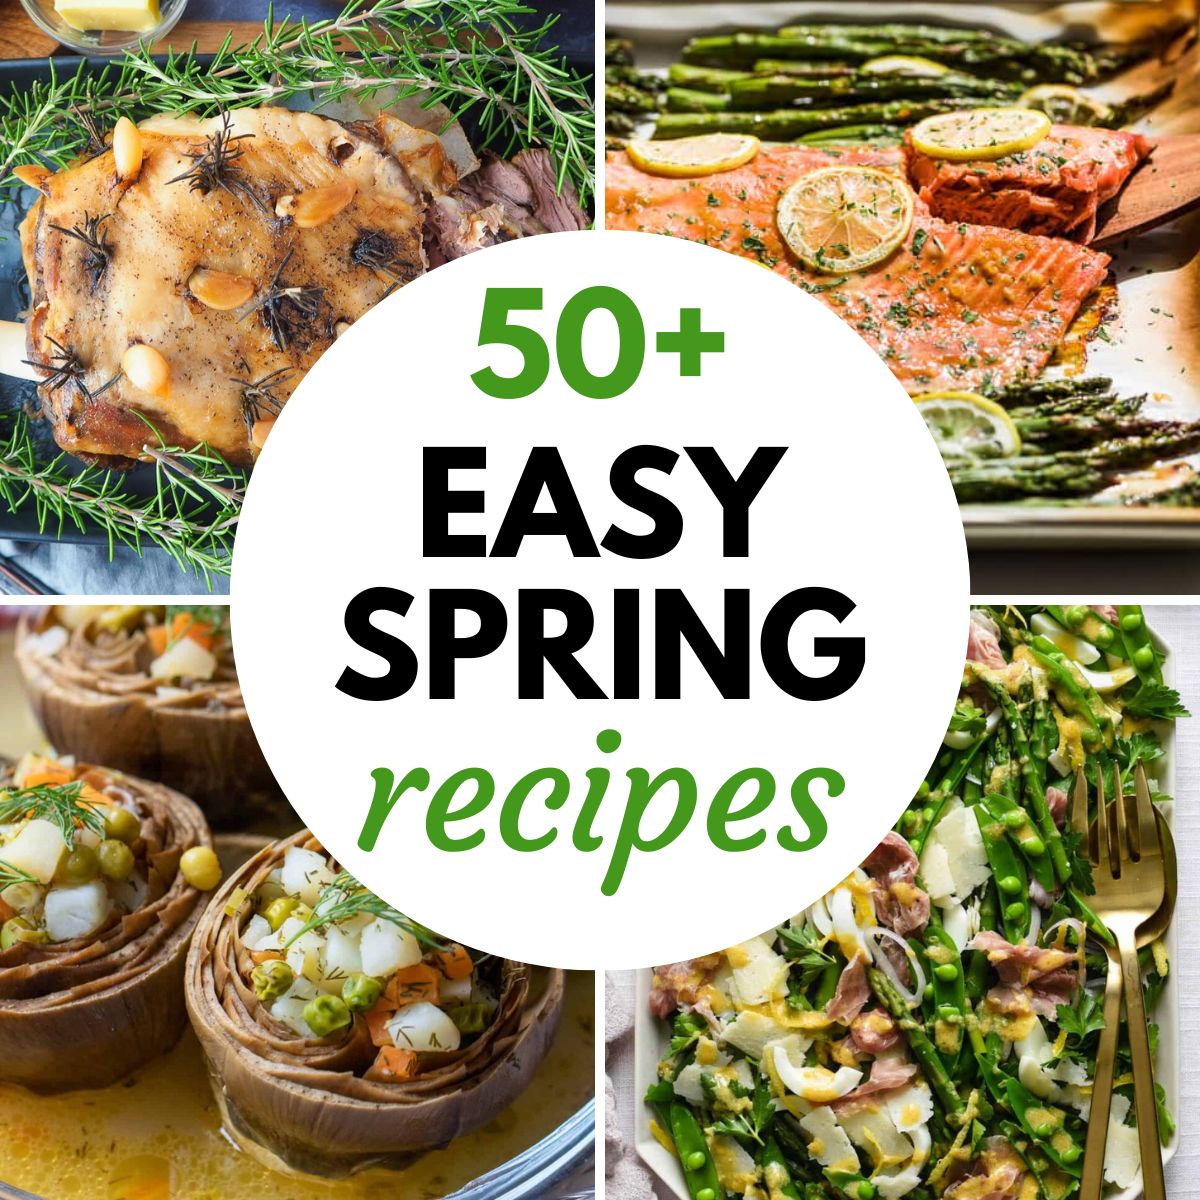 Image graphic with text that reads "50+ Easy Spring Recipes" and a collage of spring dishes.